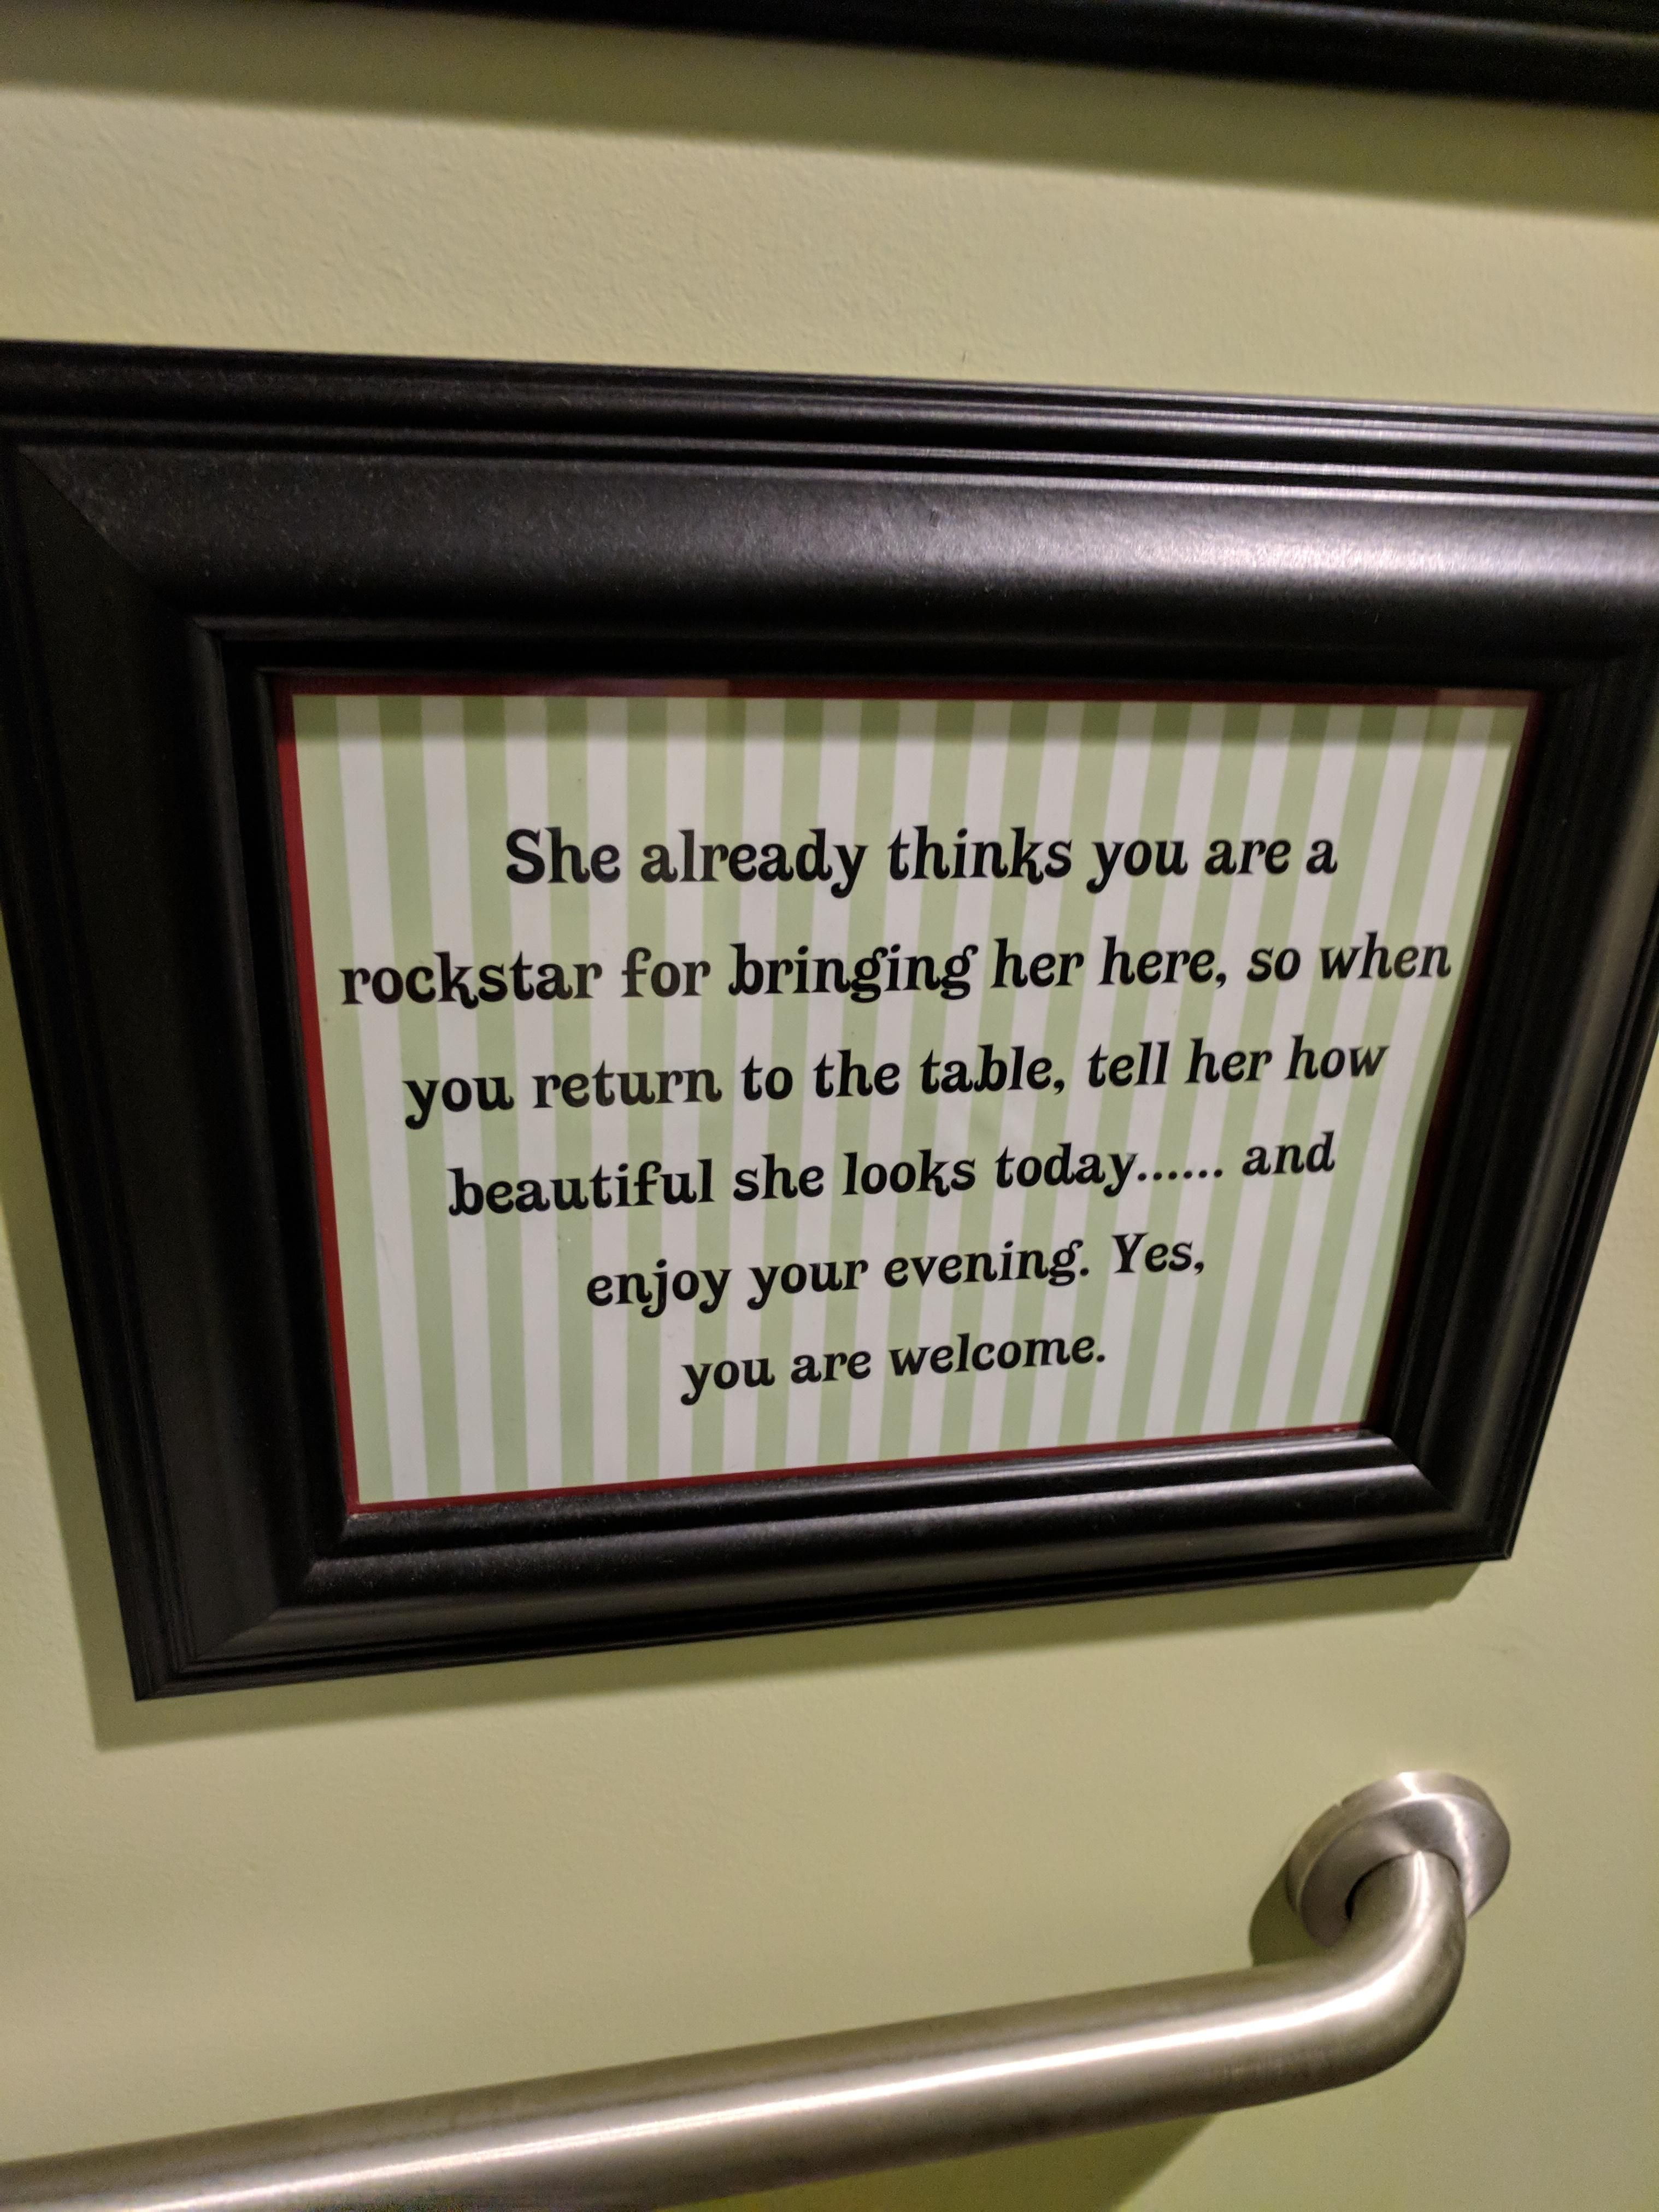 Taking relationship advice from the men's restroom.